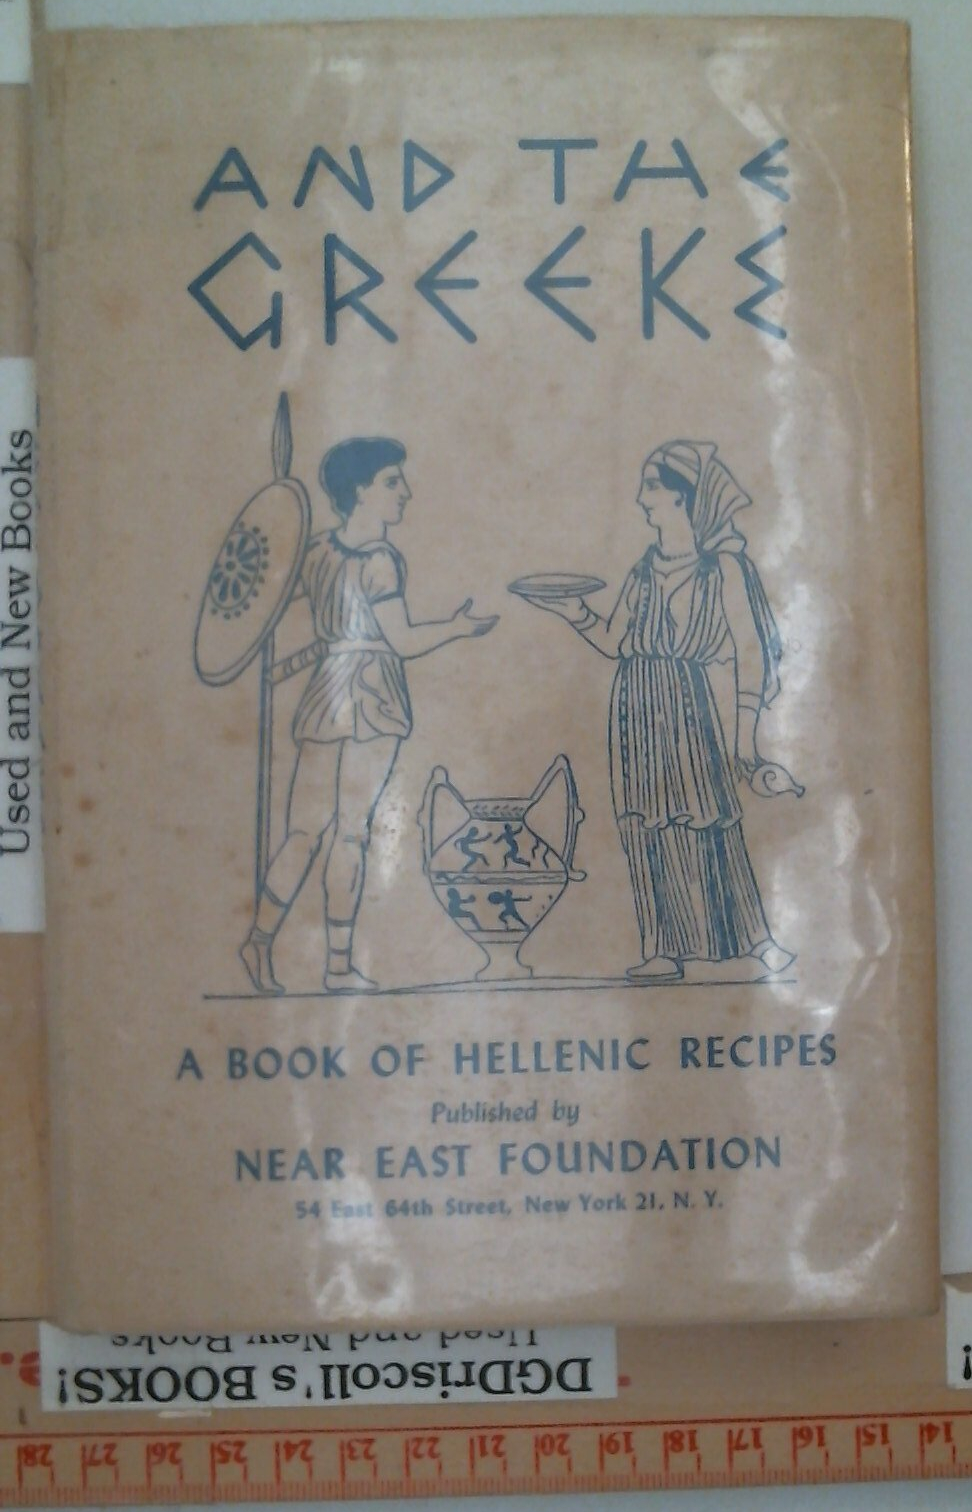 And the Greeks 